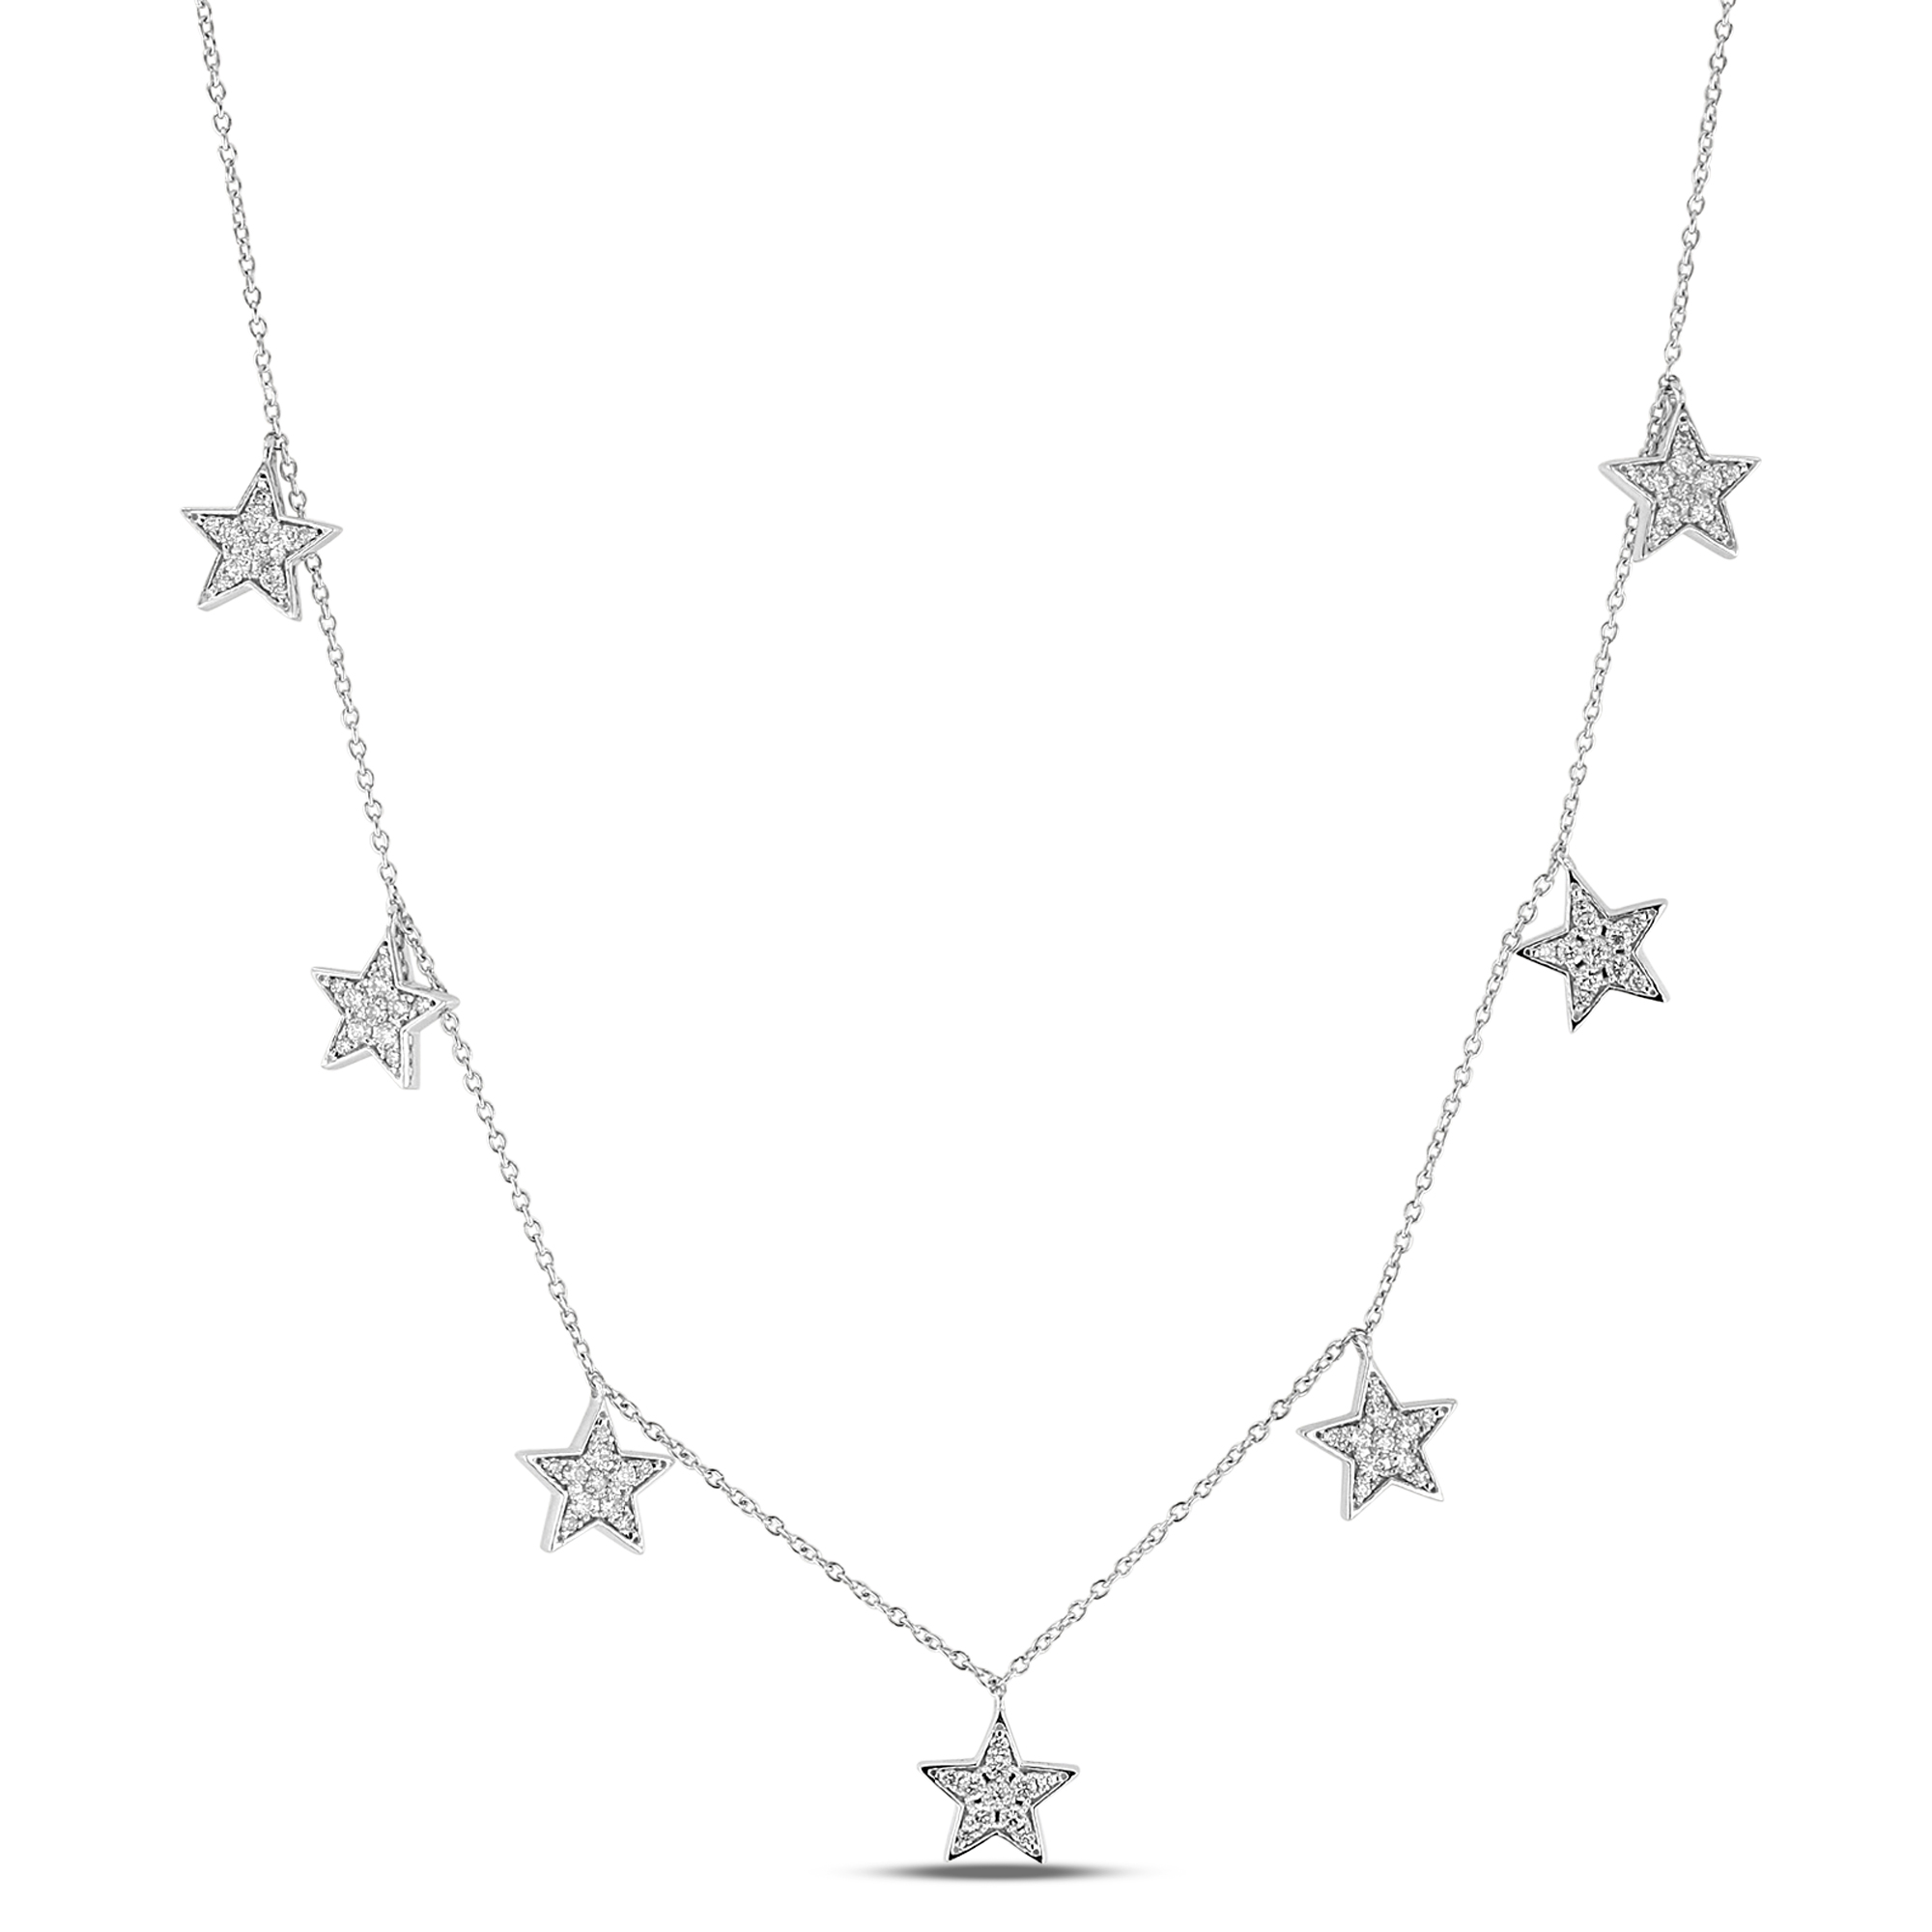 View 0.52ctw Diamond Star Necklace in 14k White Gold